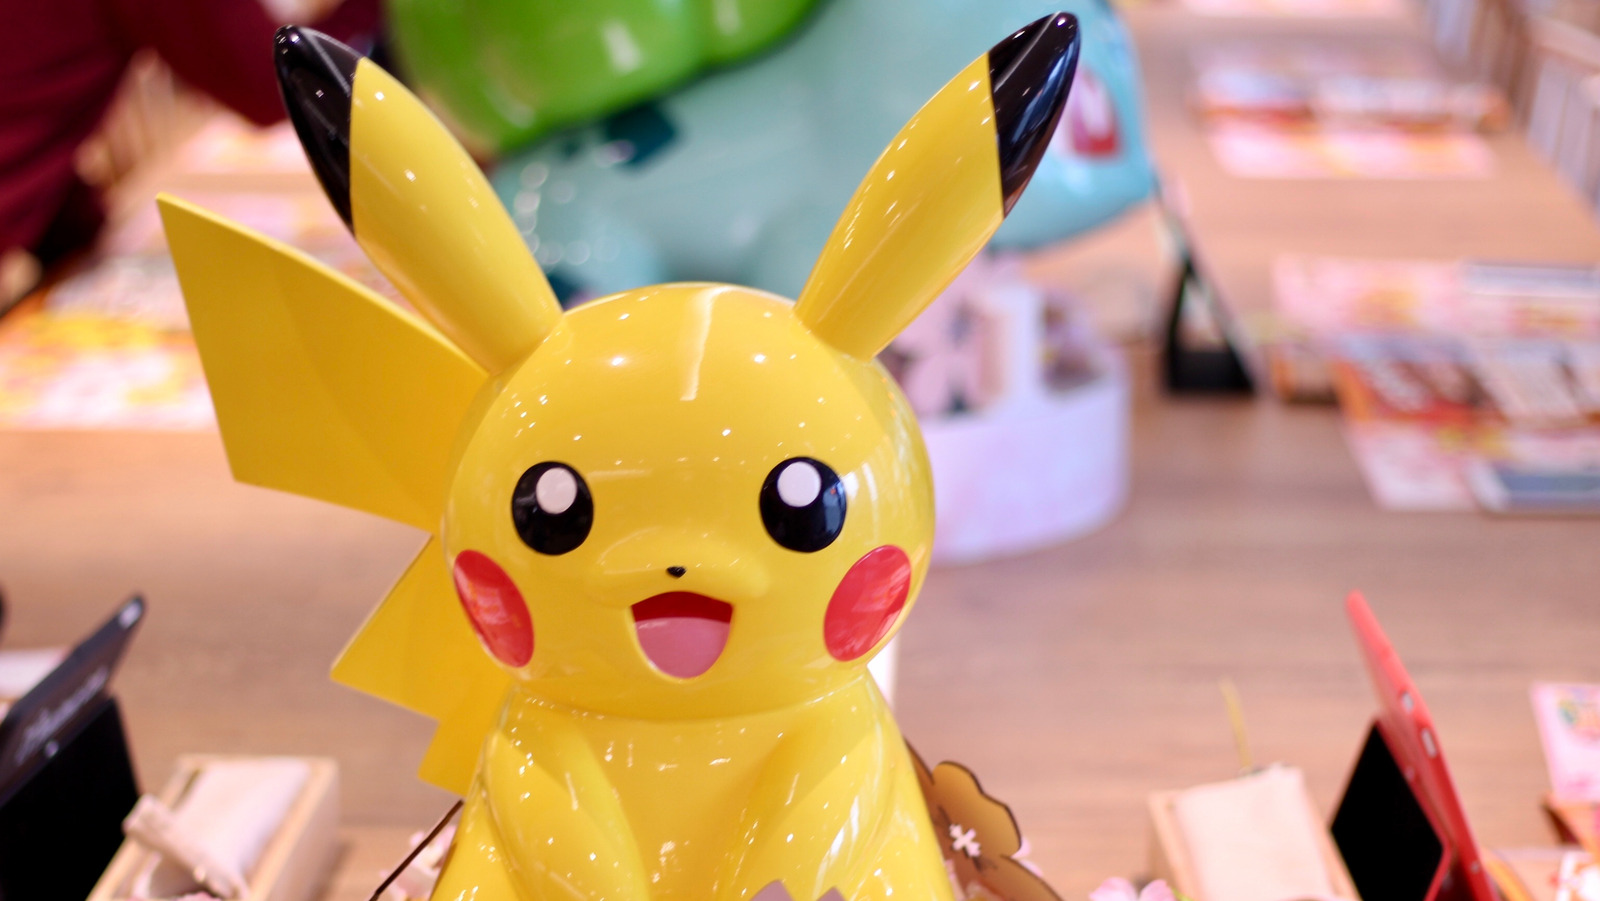 5 Classy Ways To Incorporate Pokemon Into Your Home Decor